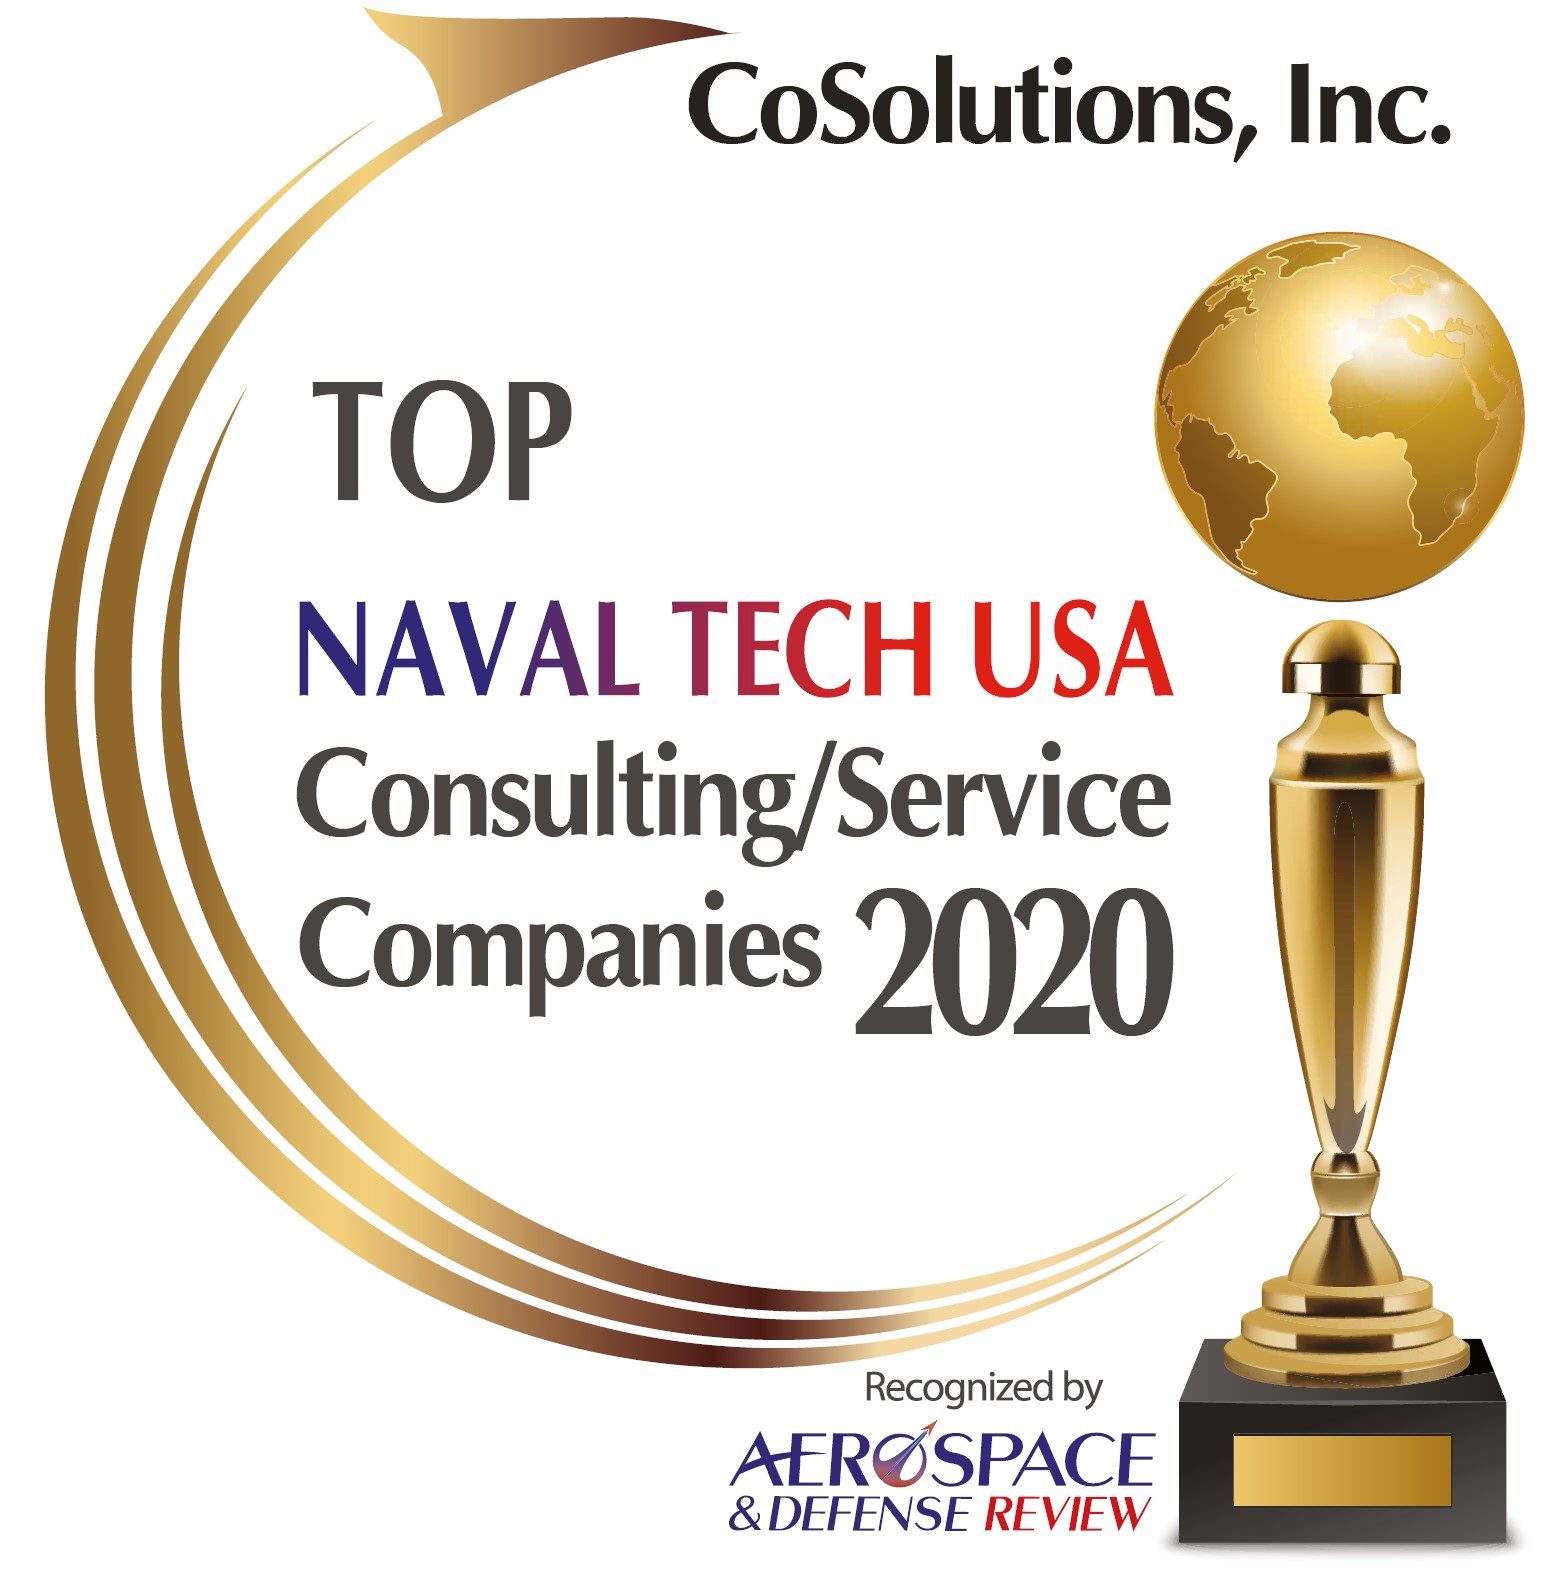 Top Naval Tech USA Consulting / Service Companies 2020 Recognize by Aerospace & Defense Review 